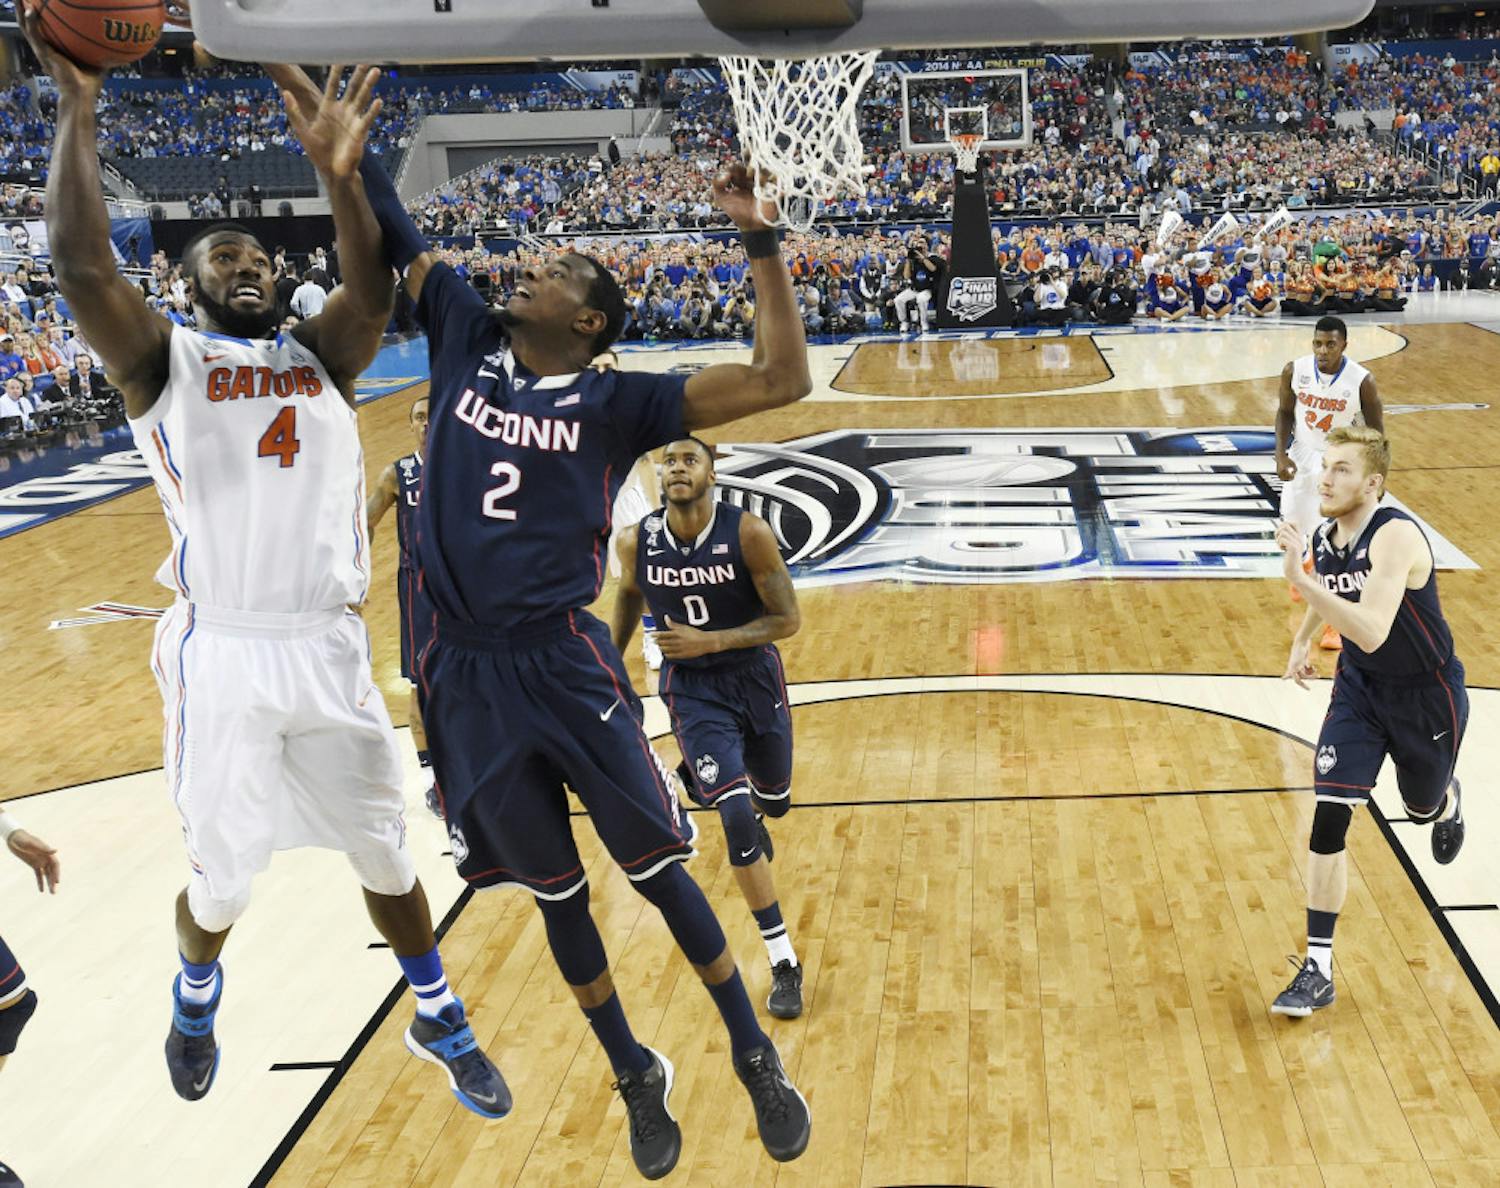 Florida center Patric Young (4) drives to the basket past Connecticut forward DeAndre Daniels (2) during the first half of the NCAA Final Four tournament game on Saturday in AT&amp;T Stadium in Arlington, Texas.